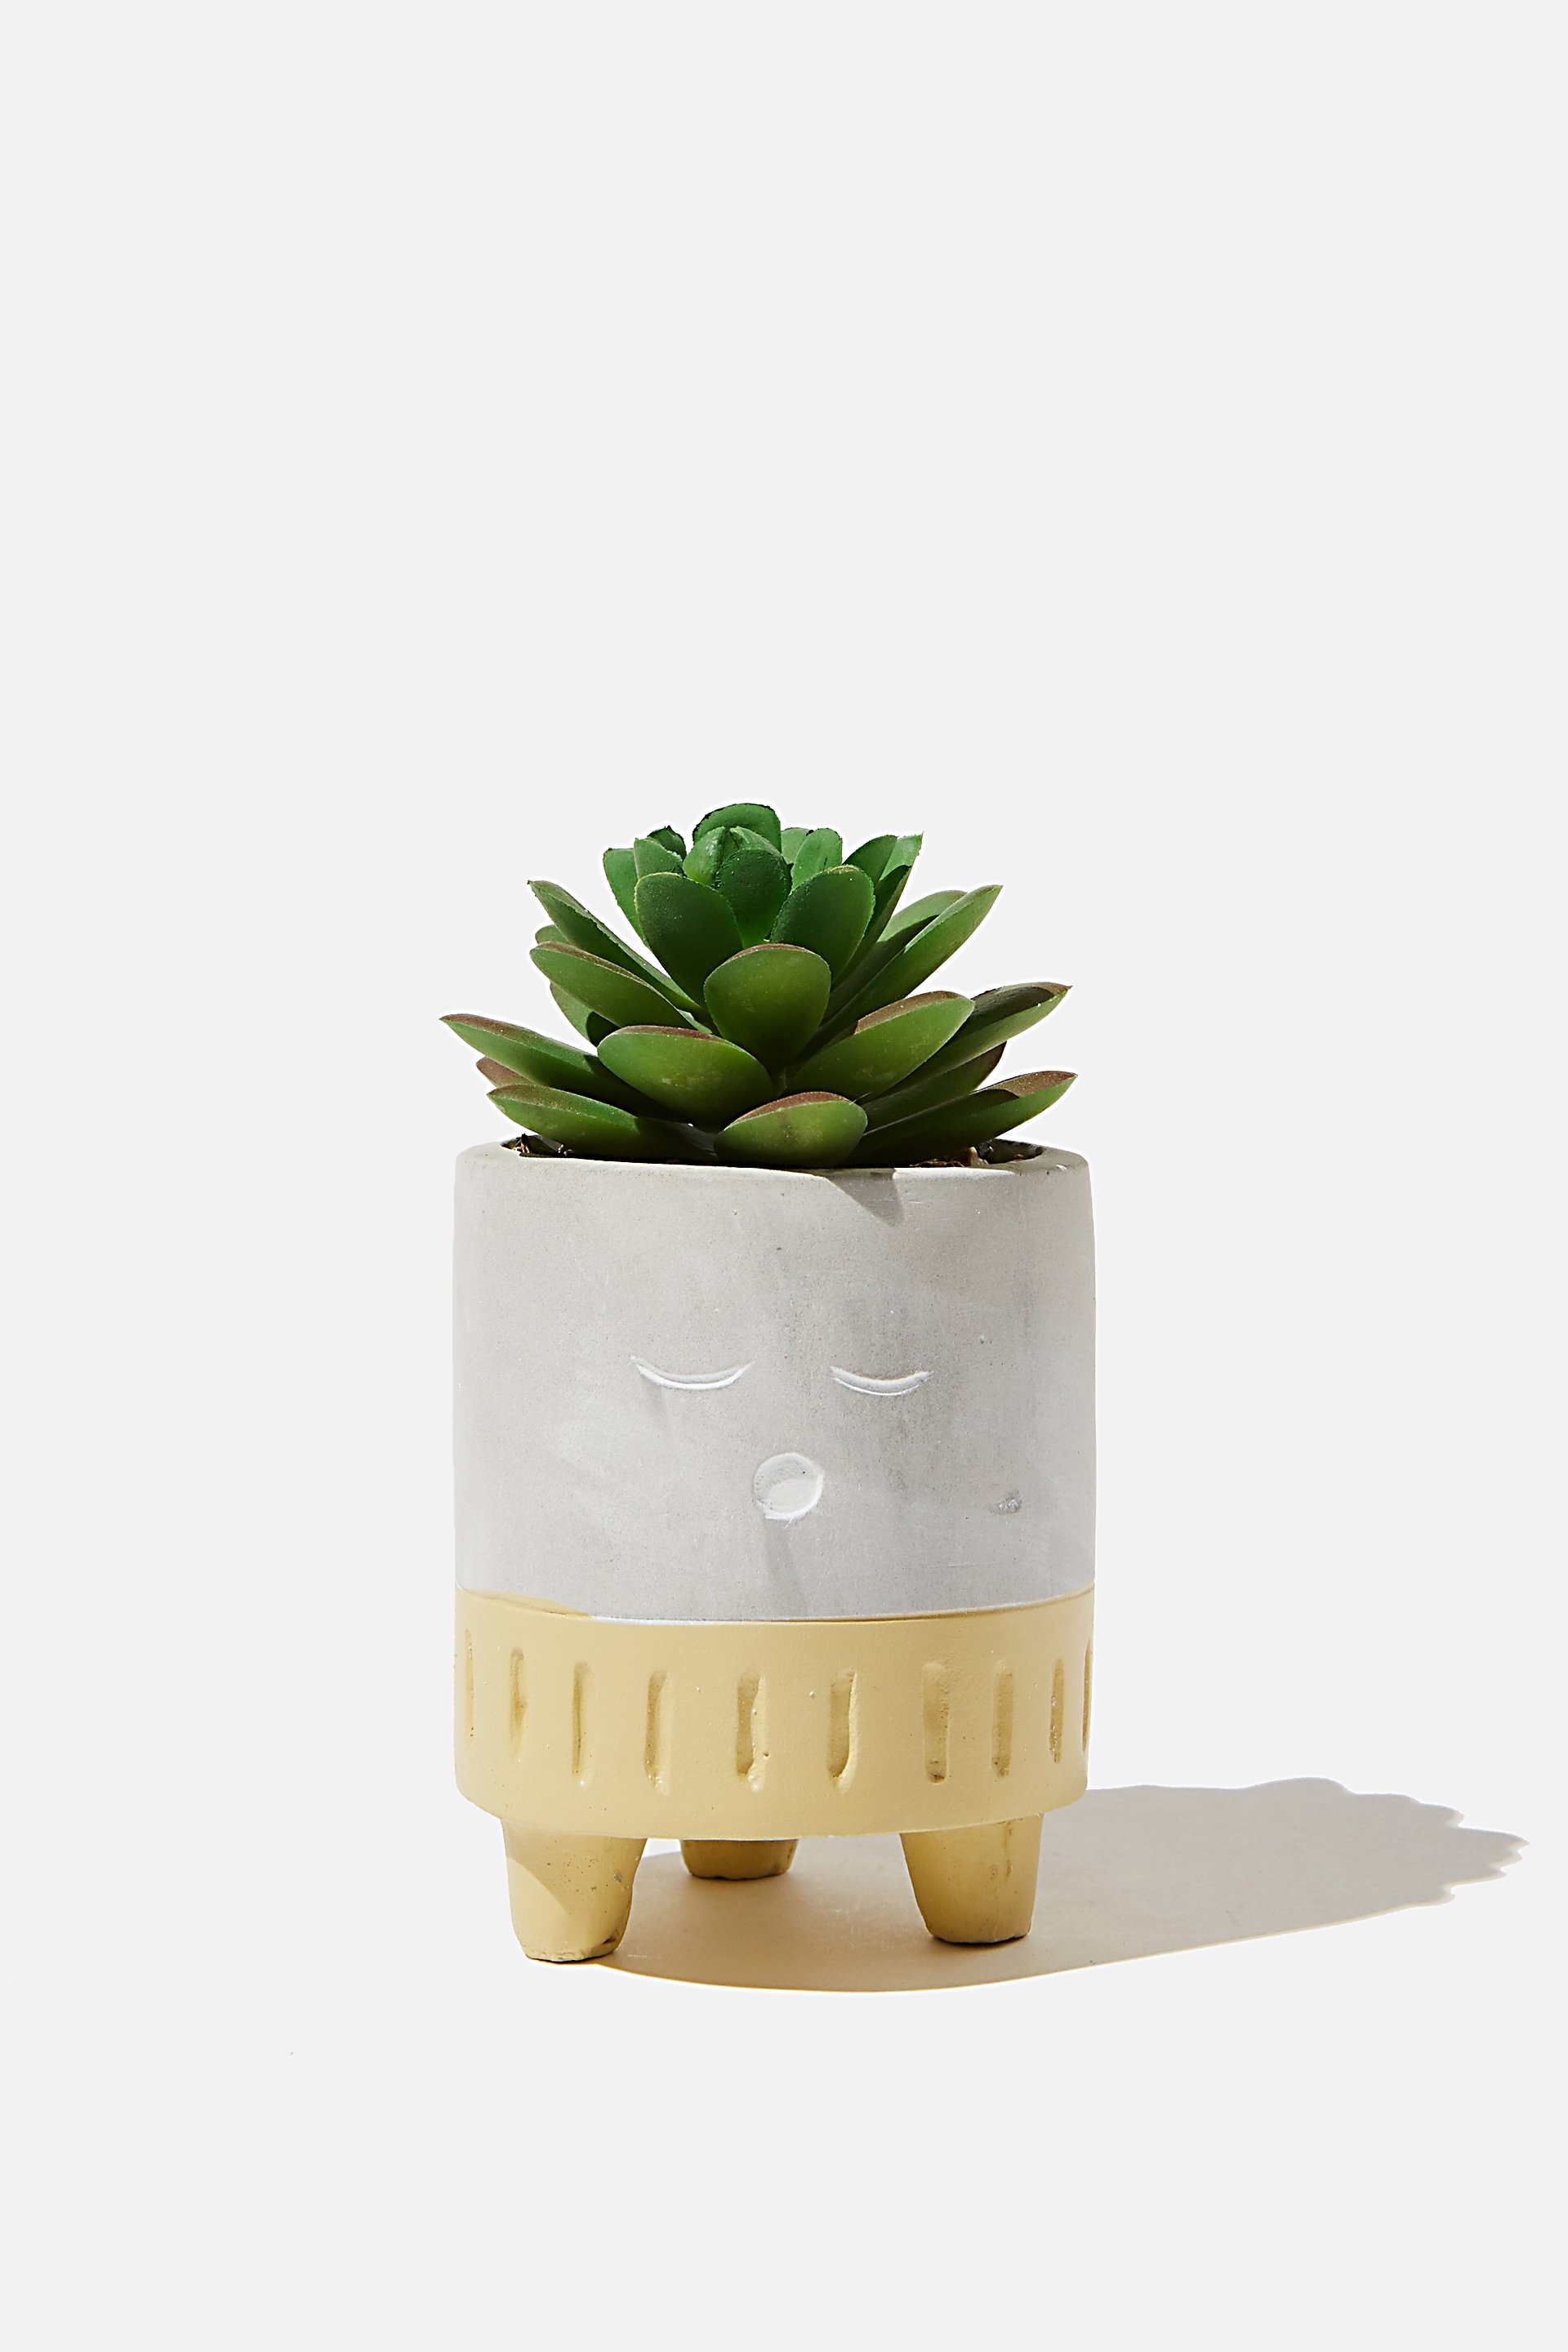 Typo - Tiny Planter With Plant - Cement & mustard sleepy face